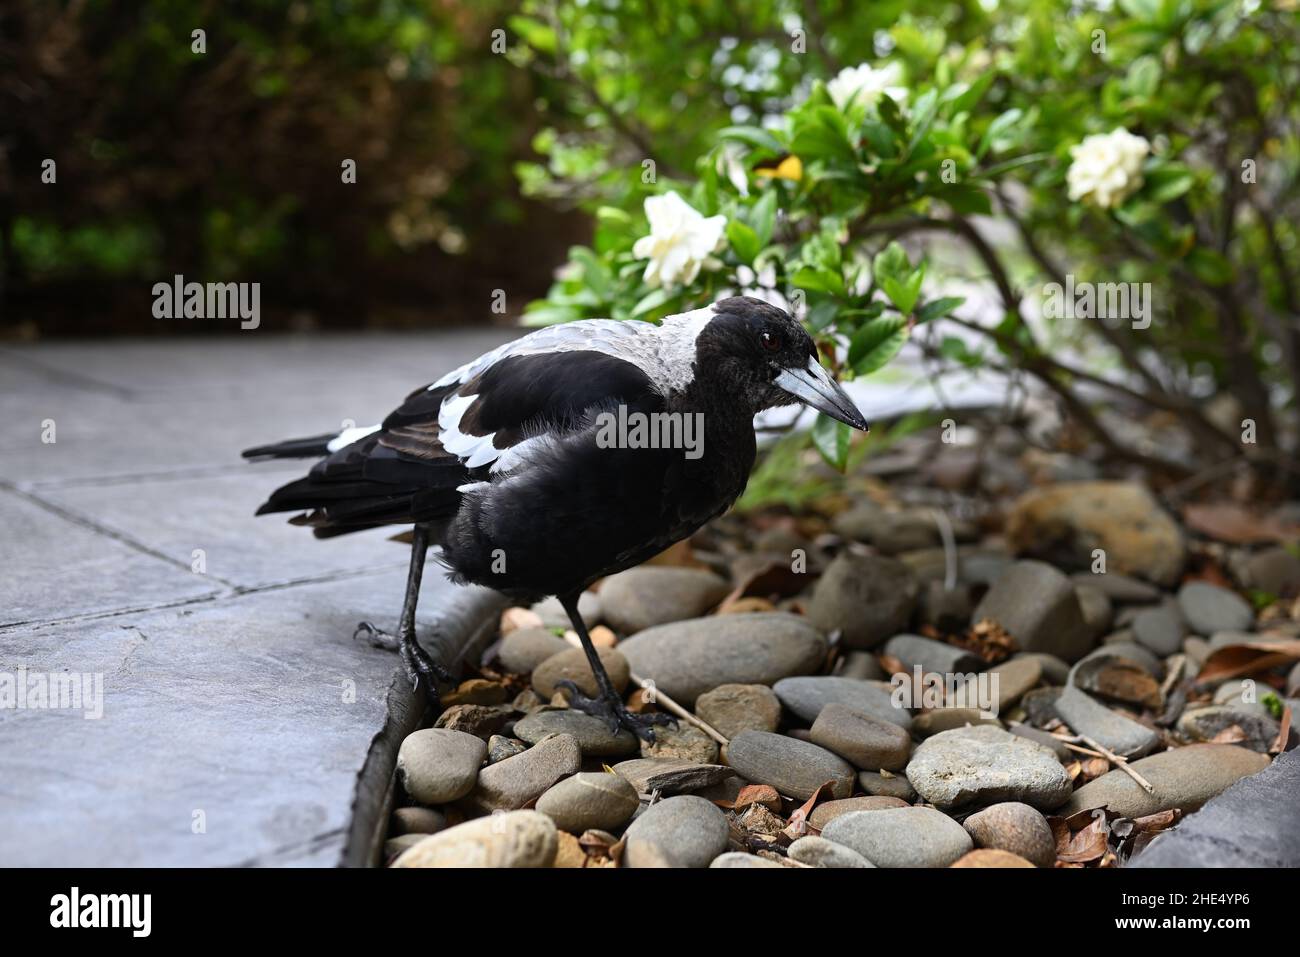 Australian magpie stepping into a stone-covered flower bed, with a gardenia bush in the background Stock Photo